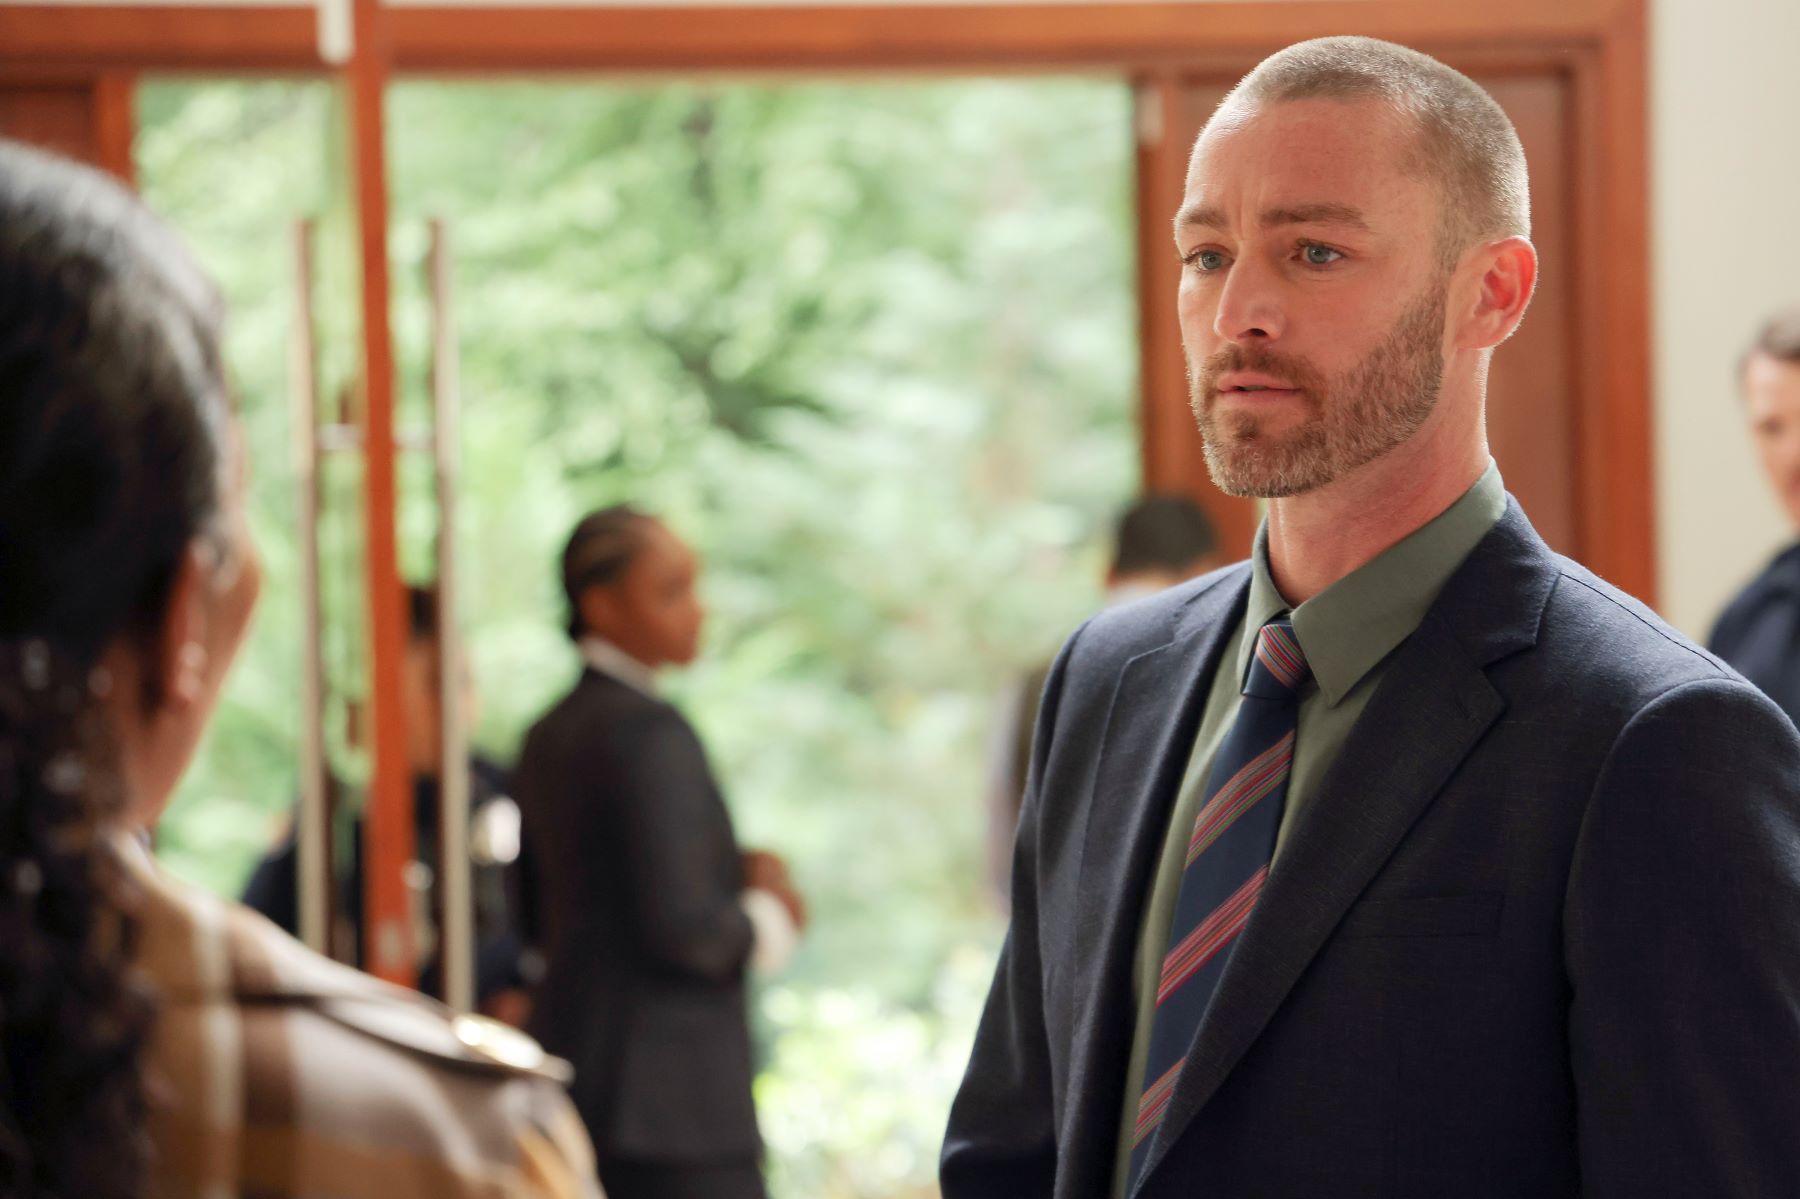 Jake McLaughlin, in character as Michael Ormewood in 'Will Trent' Season 1 Episode 1, wears a dark blue suit over a green button-up shirt and blue, red, and tan striped tie.